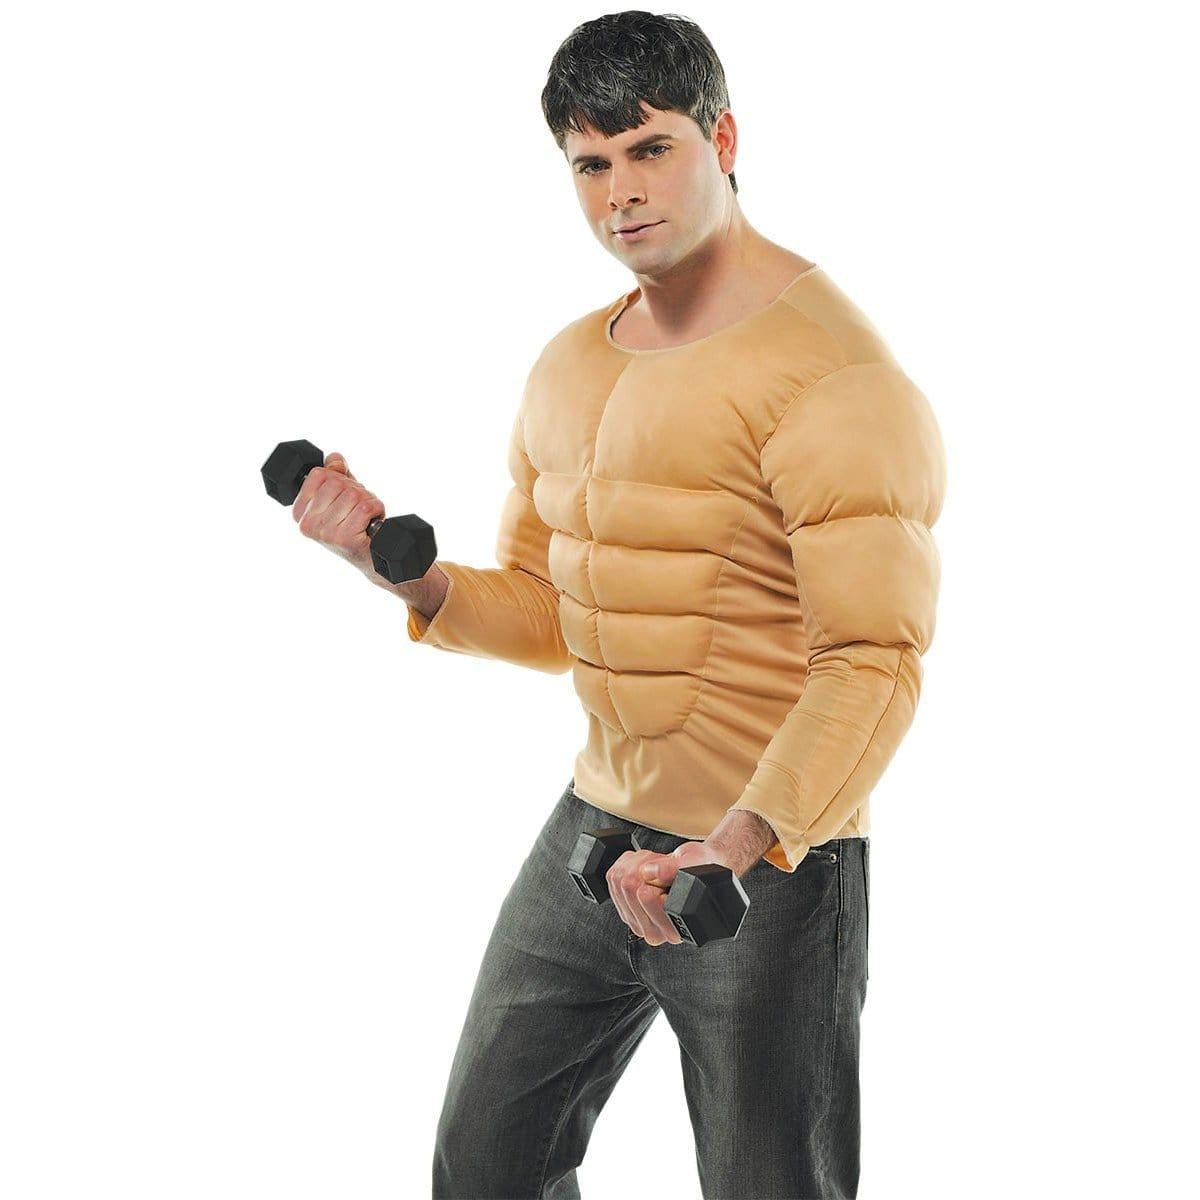 Buy Costume Accessories Muscle shirt for adults sold at Party Expert